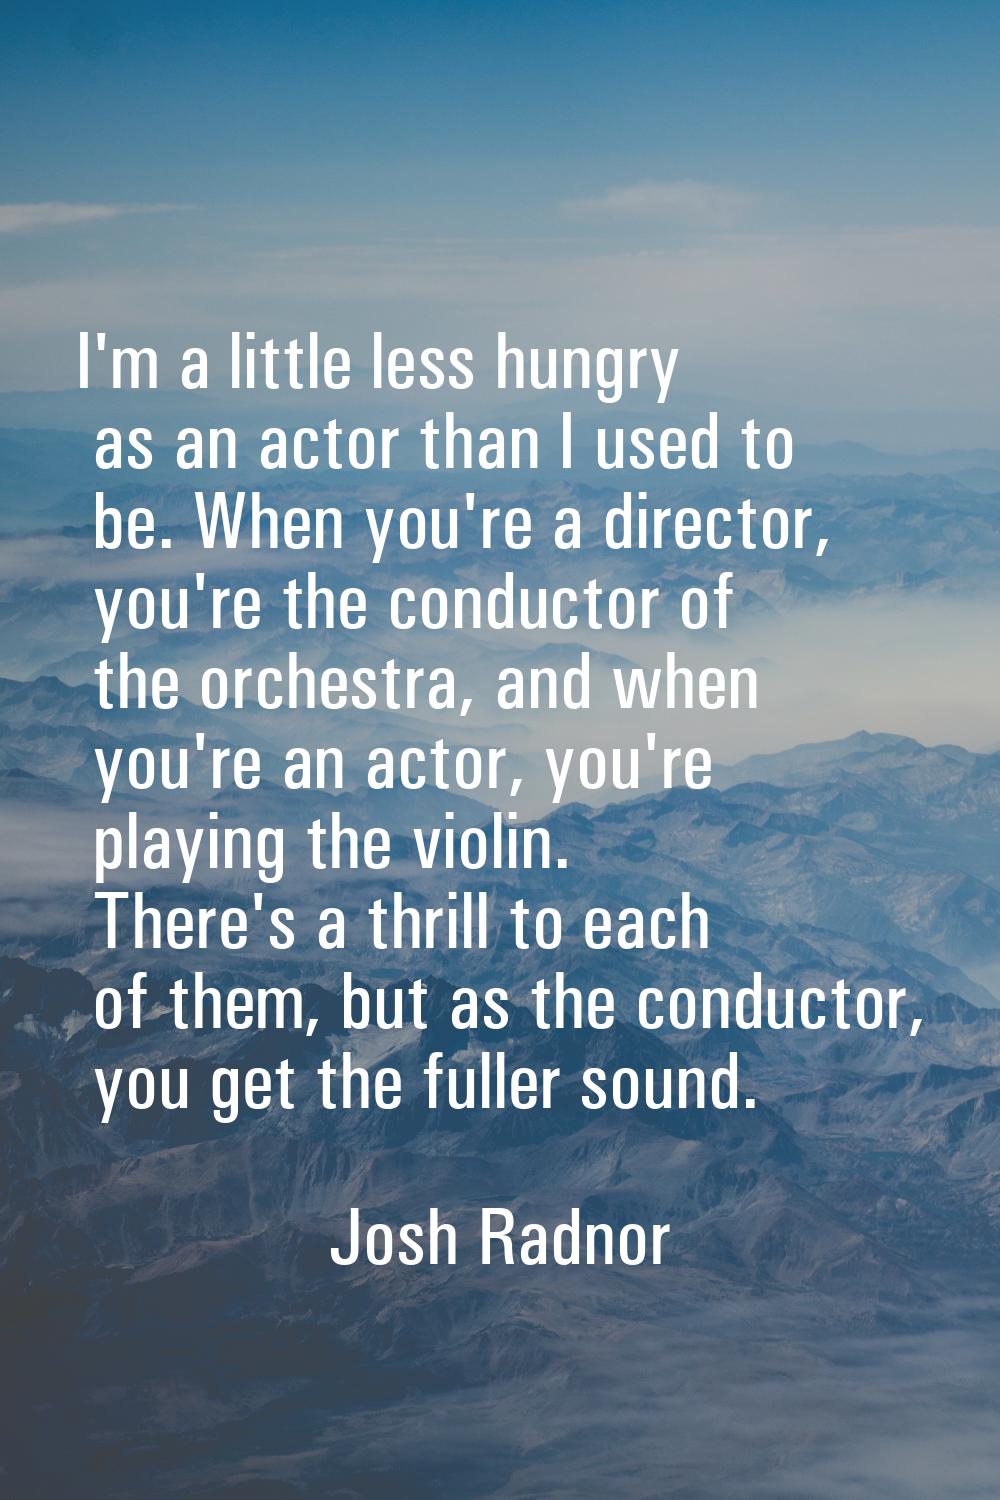 I'm a little less hungry as an actor than I used to be. When you're a director, you're the conducto